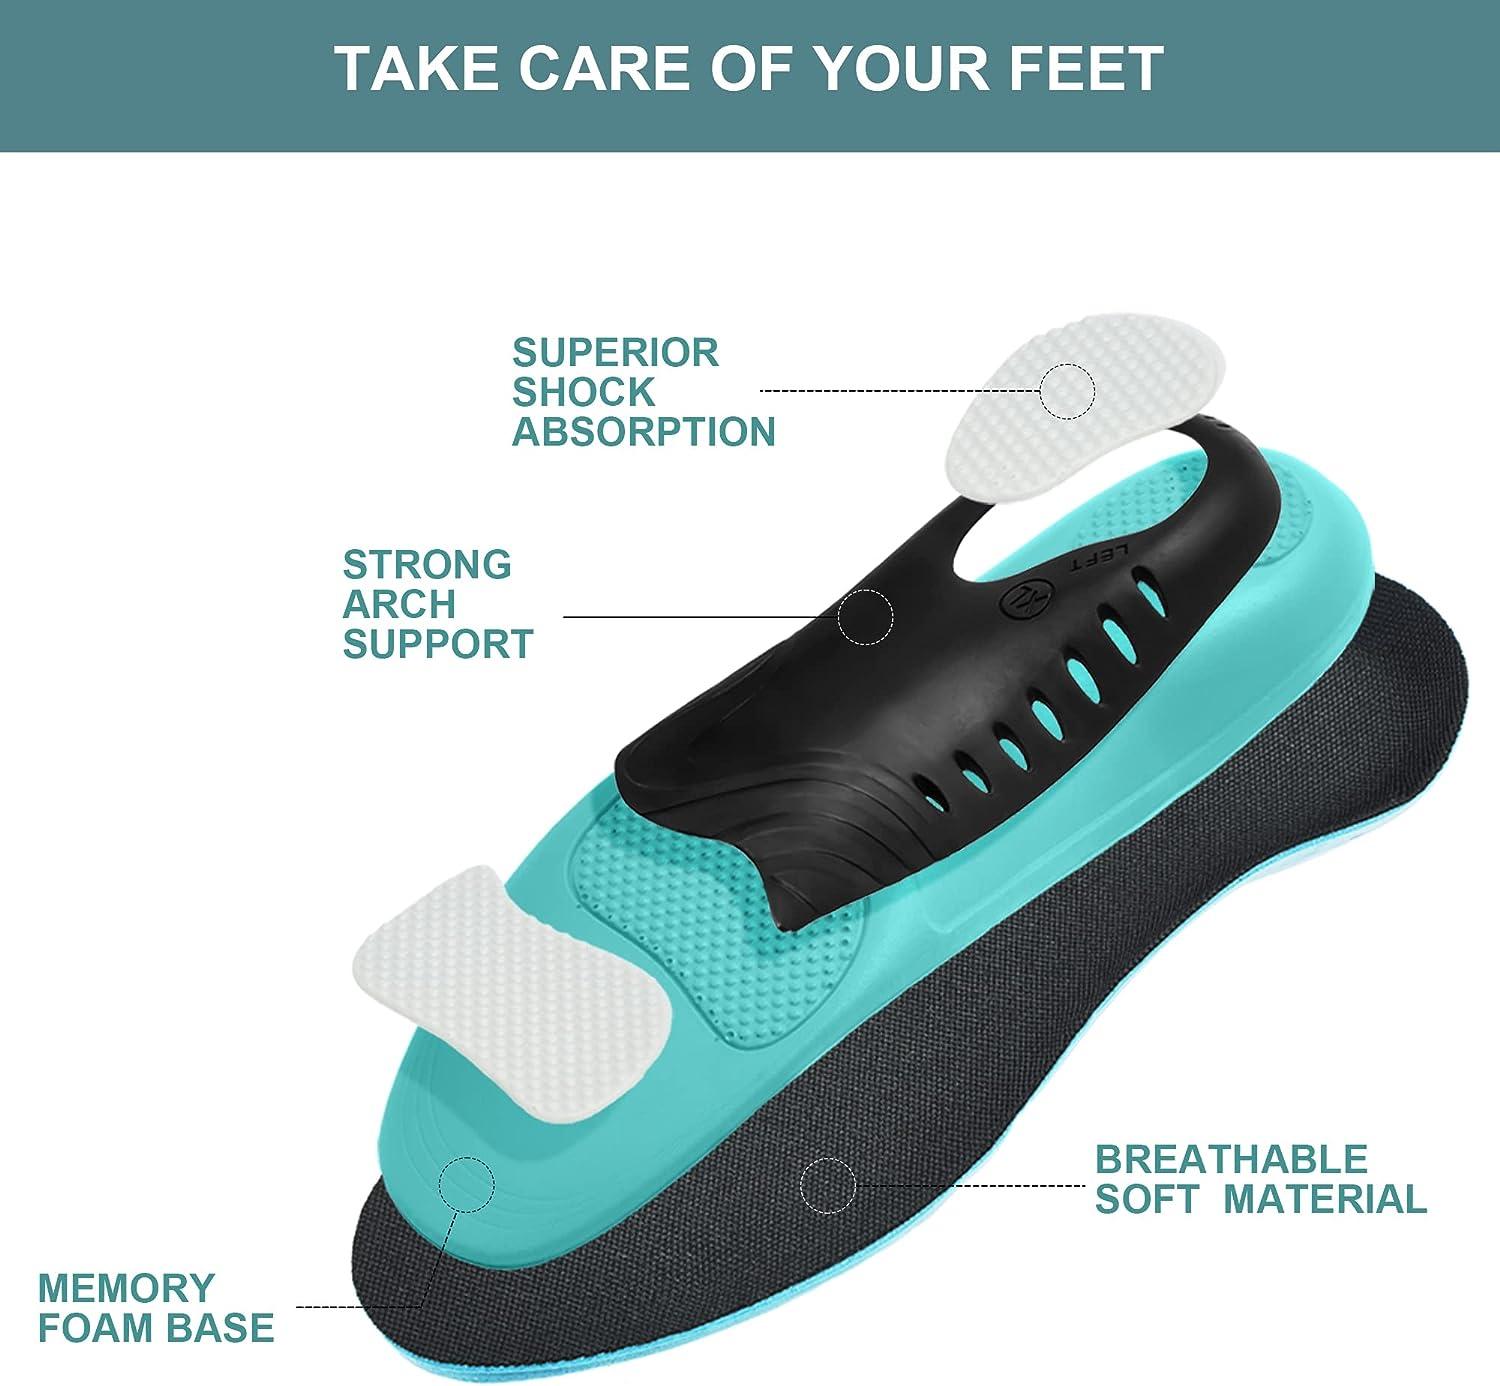 11 Well-Designed Walking Shoes That Every Senior Will Love | Walking shoes,  Wellness design, Best walking shoes